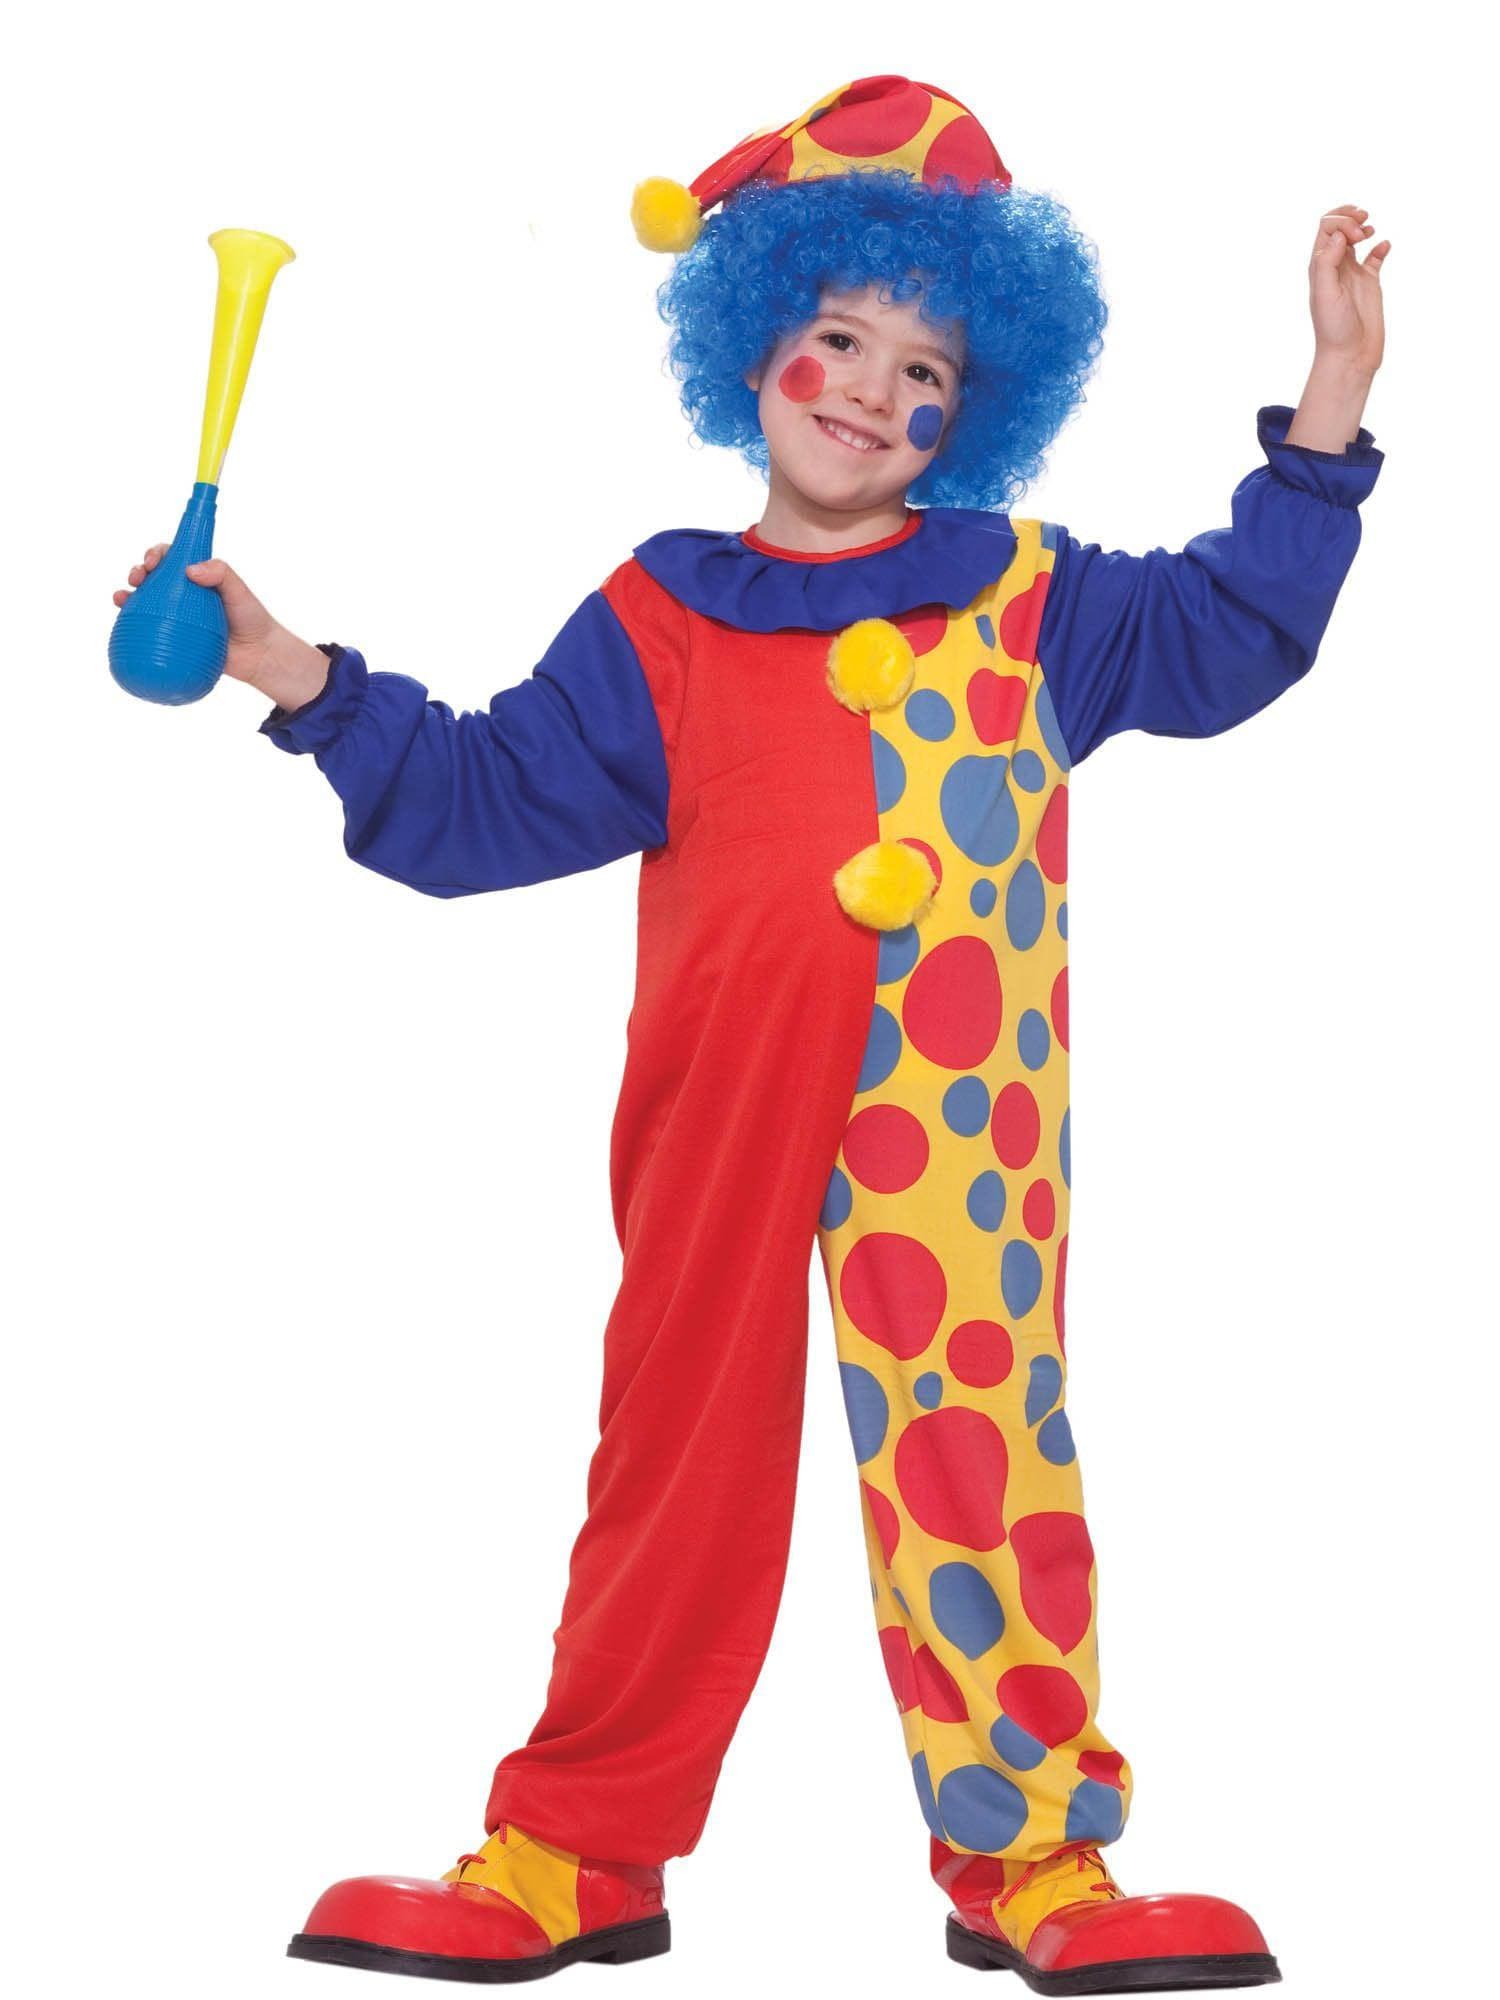 Baby/Toddler Baby Clown Costume - costumes.com